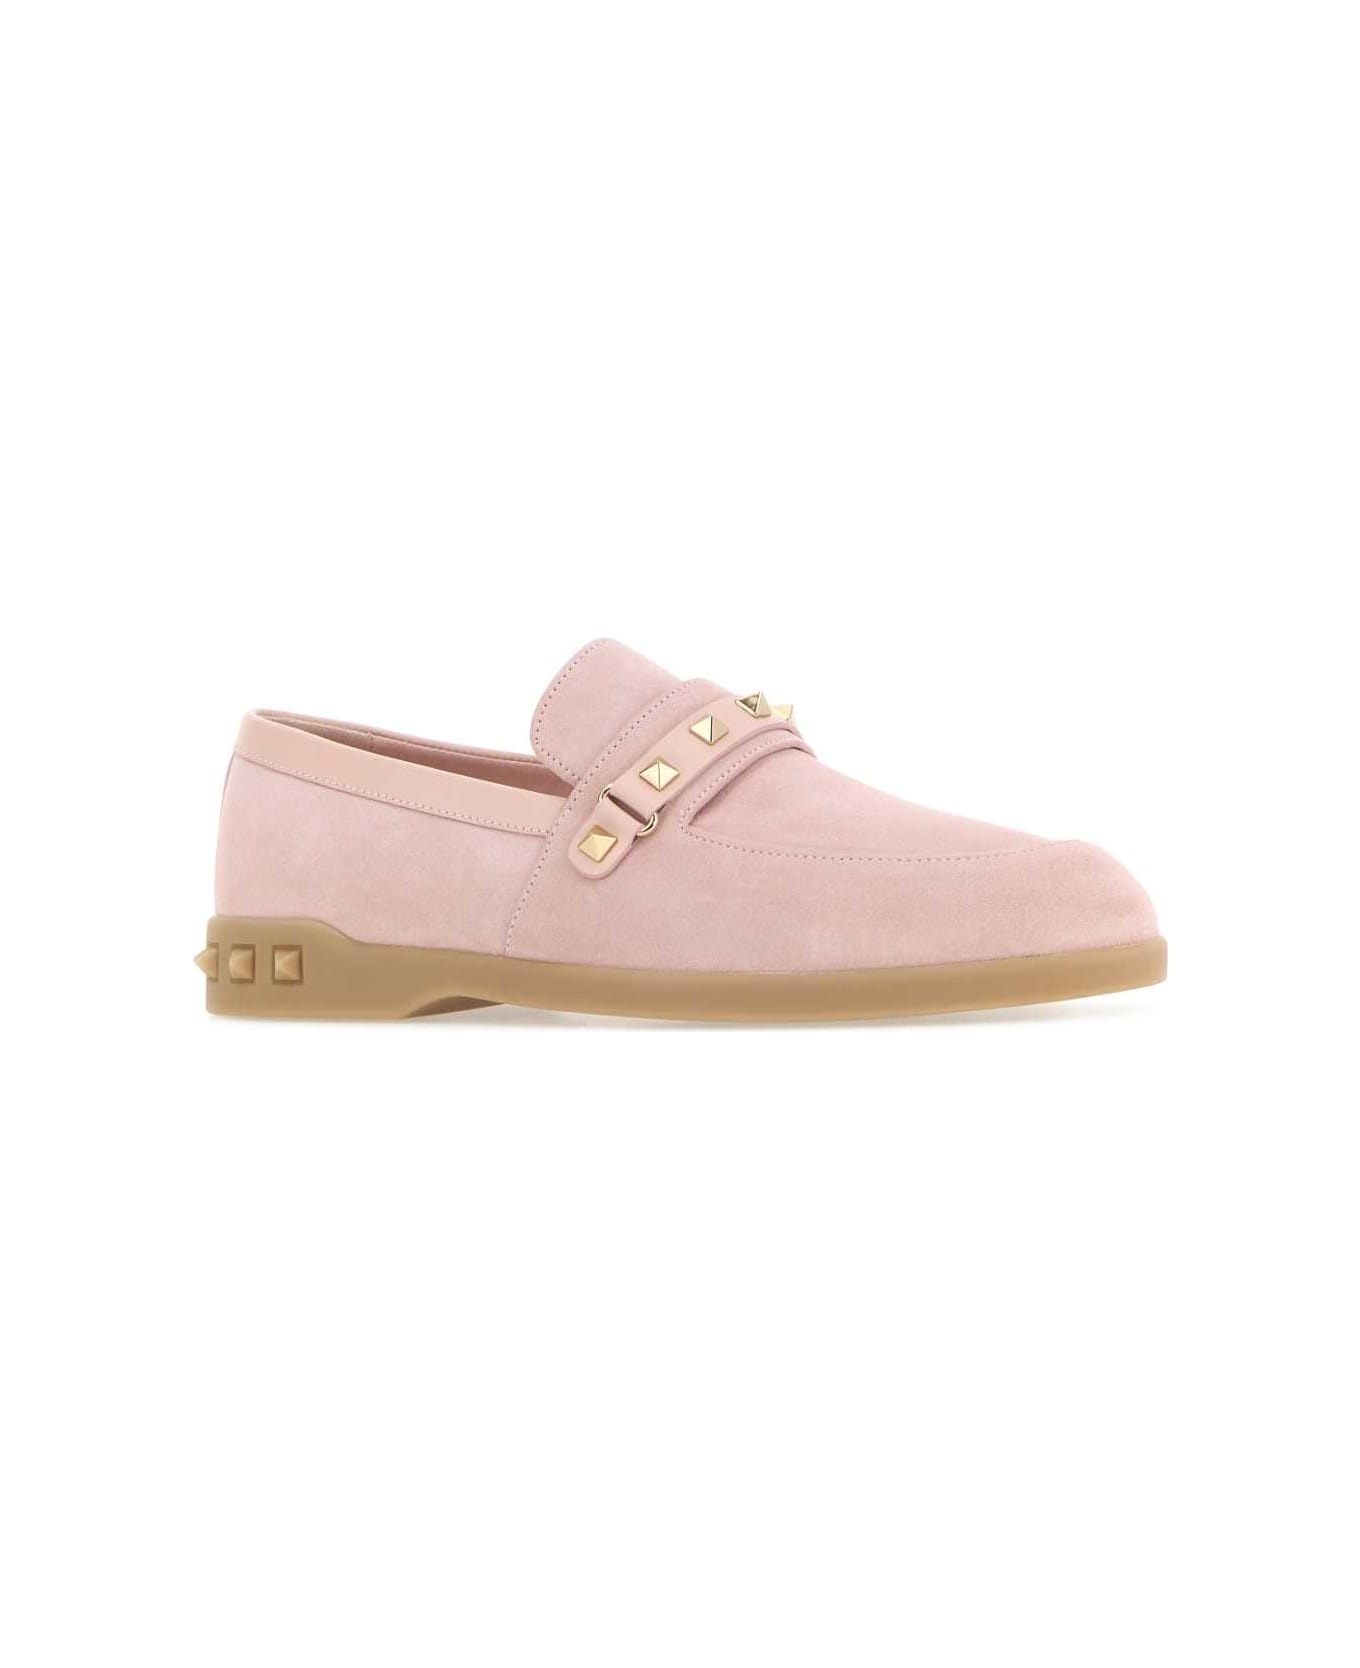 Pastel Pink Suede Leisure Flows Loafers - 2